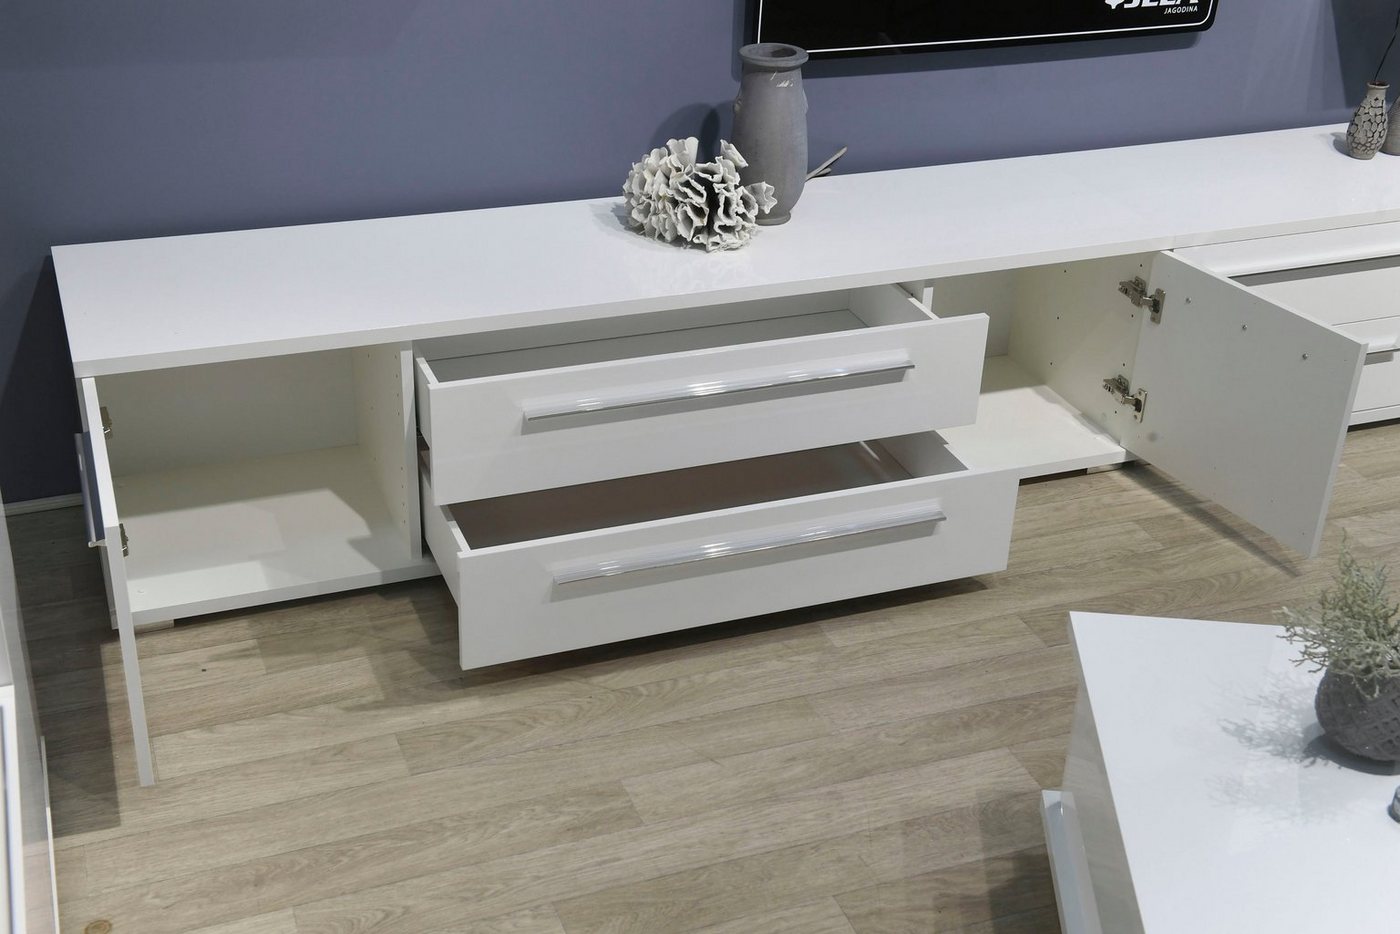 Places of Style TV-Board Piano, Hochglanz UV lackiert, mit Soft-Close-Funktion von Places of Style